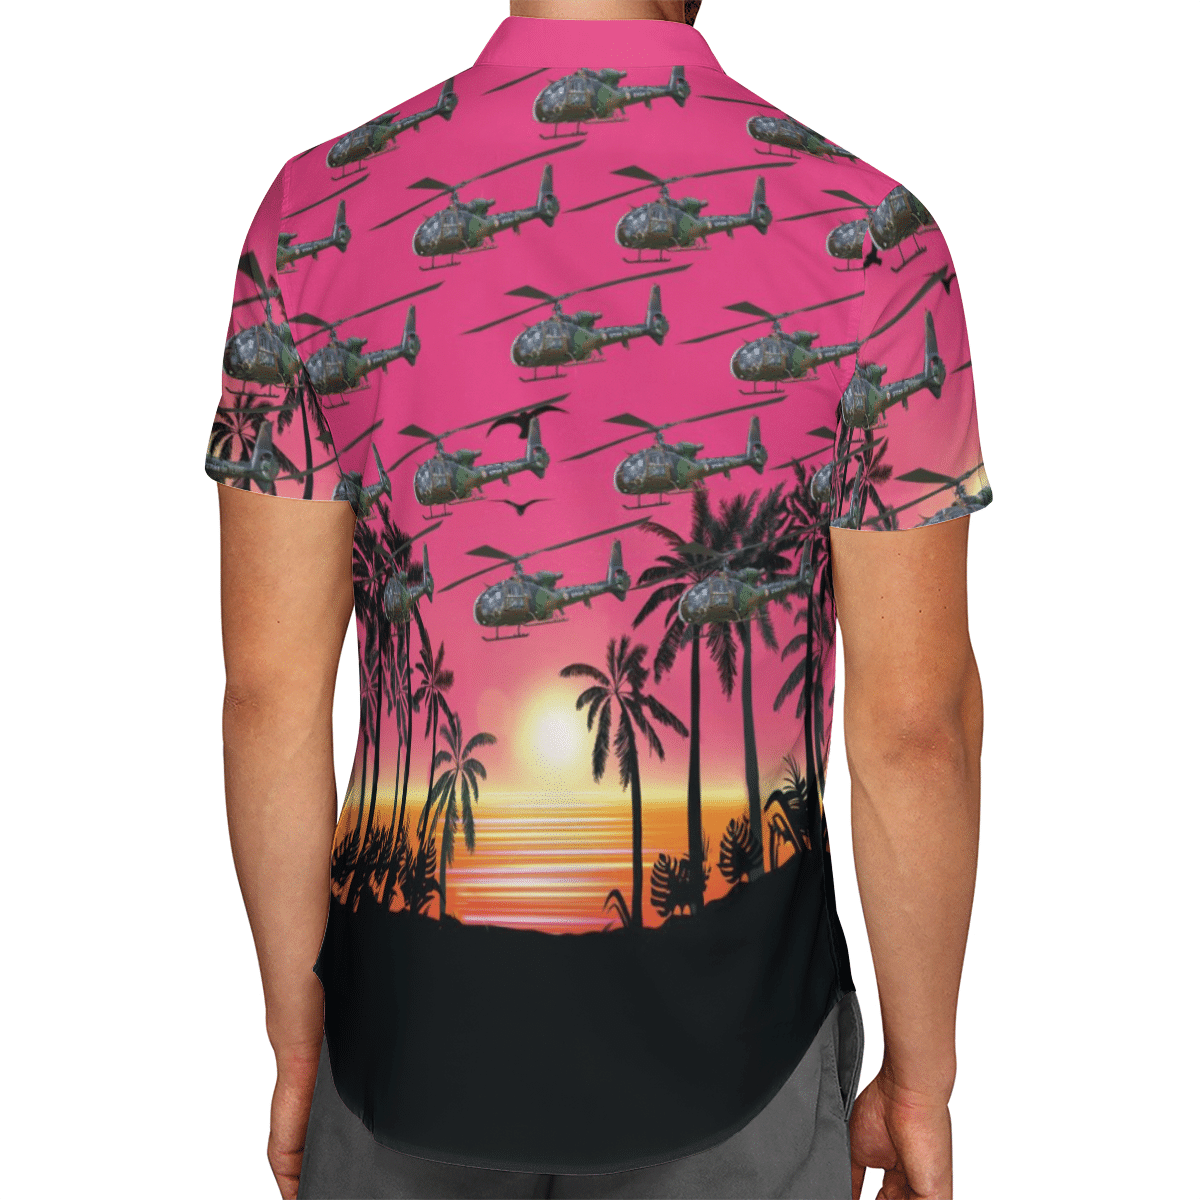 Going to the beach with a quality shirt 6